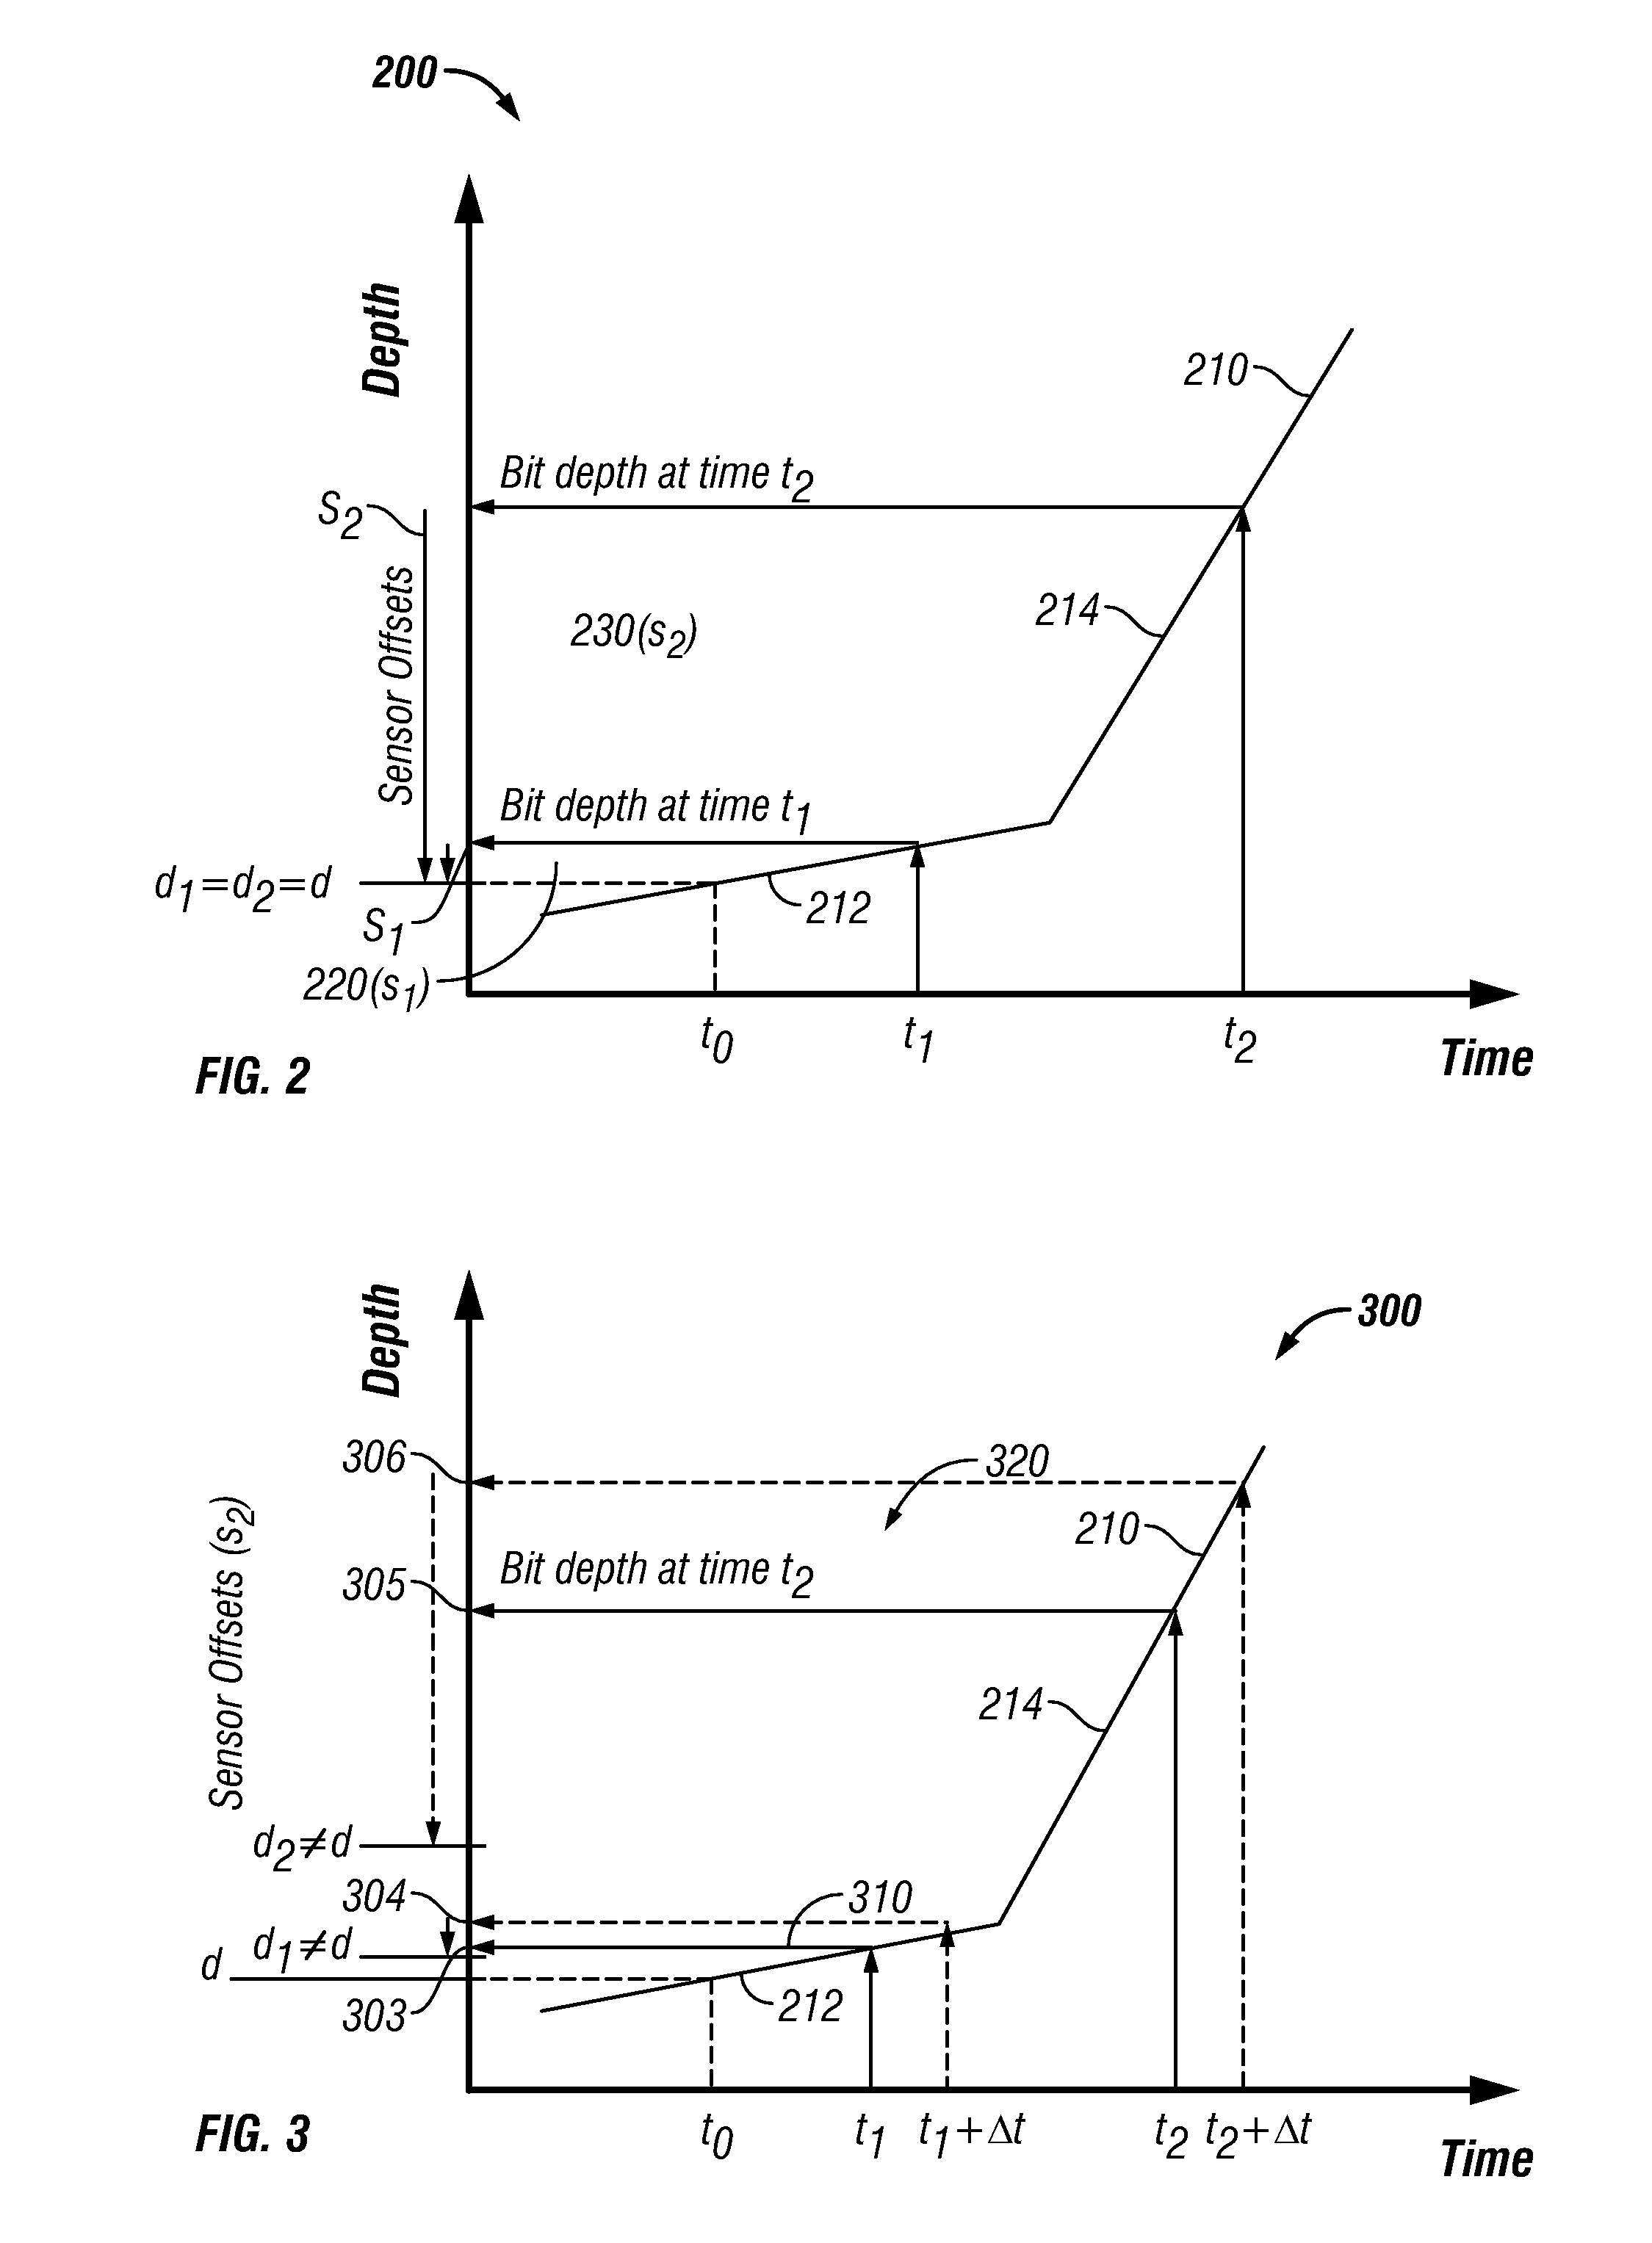 Apparatus and Method for Clock Shift Correction for Measurement-While-Drilling Measurements